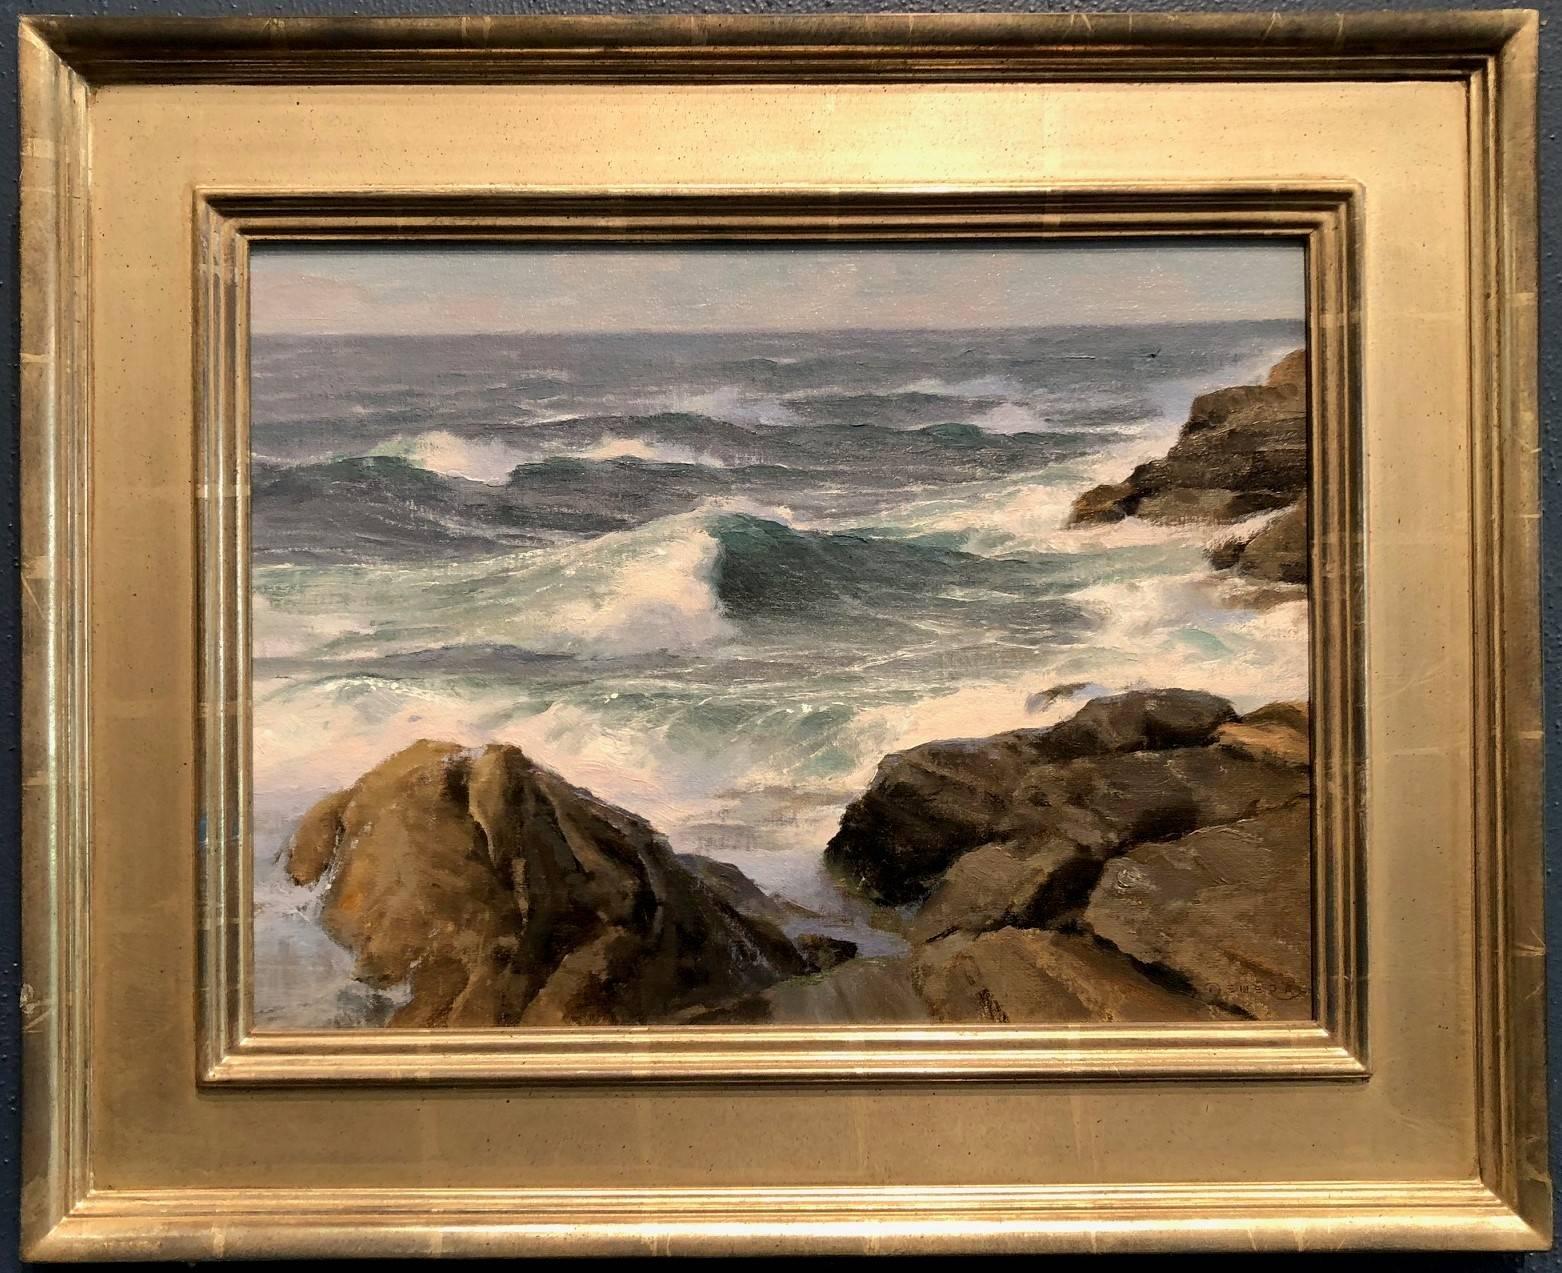 Pemaquid Surf - Painting by Donald Demers